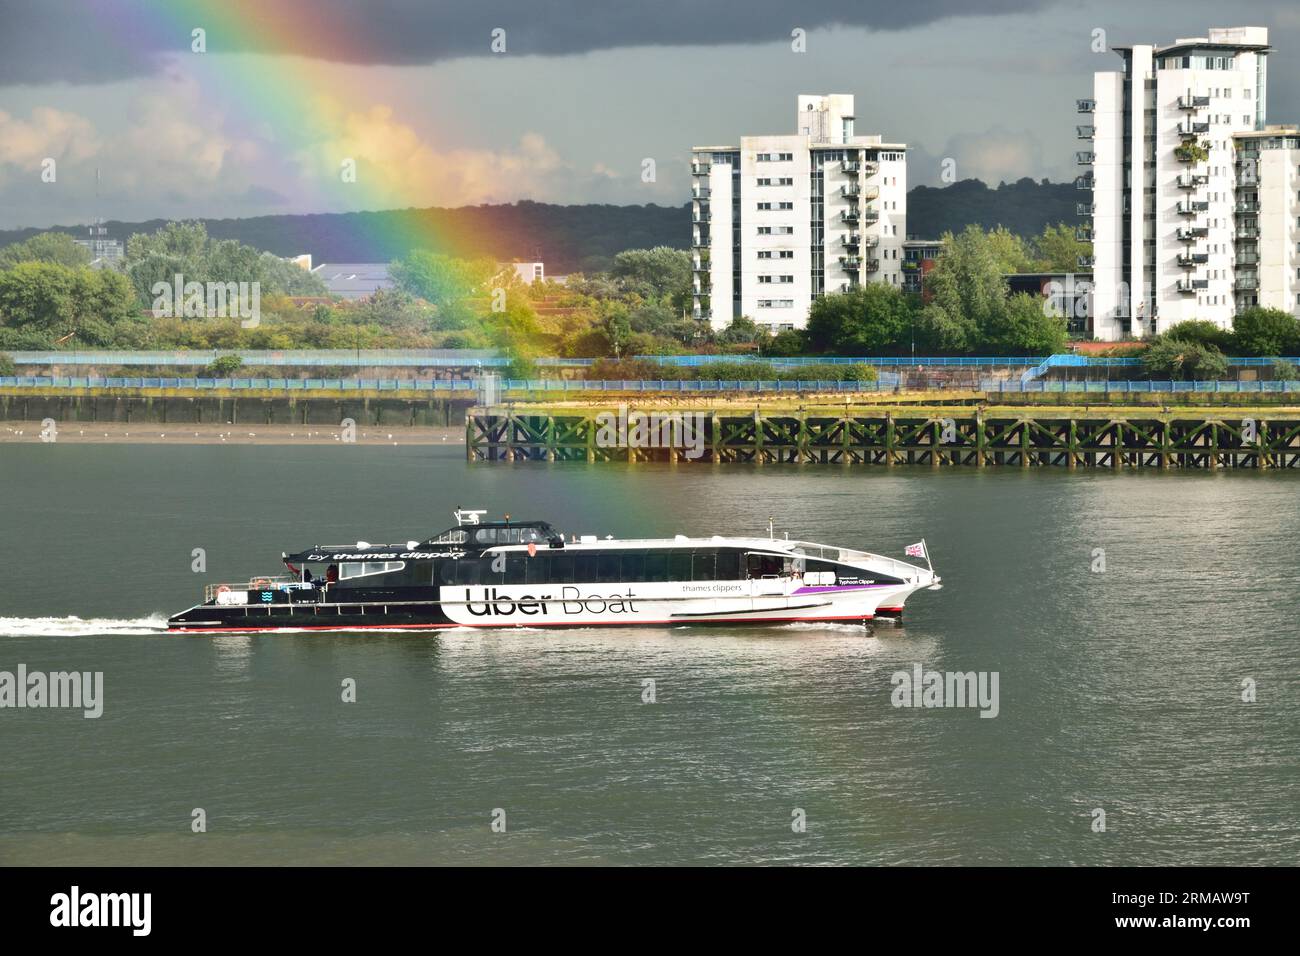 Uber Boat by Thames Clipper river bus service vessel Typhoon Clipper on the River Thames in London under stormy with a rainbow Stock Photo